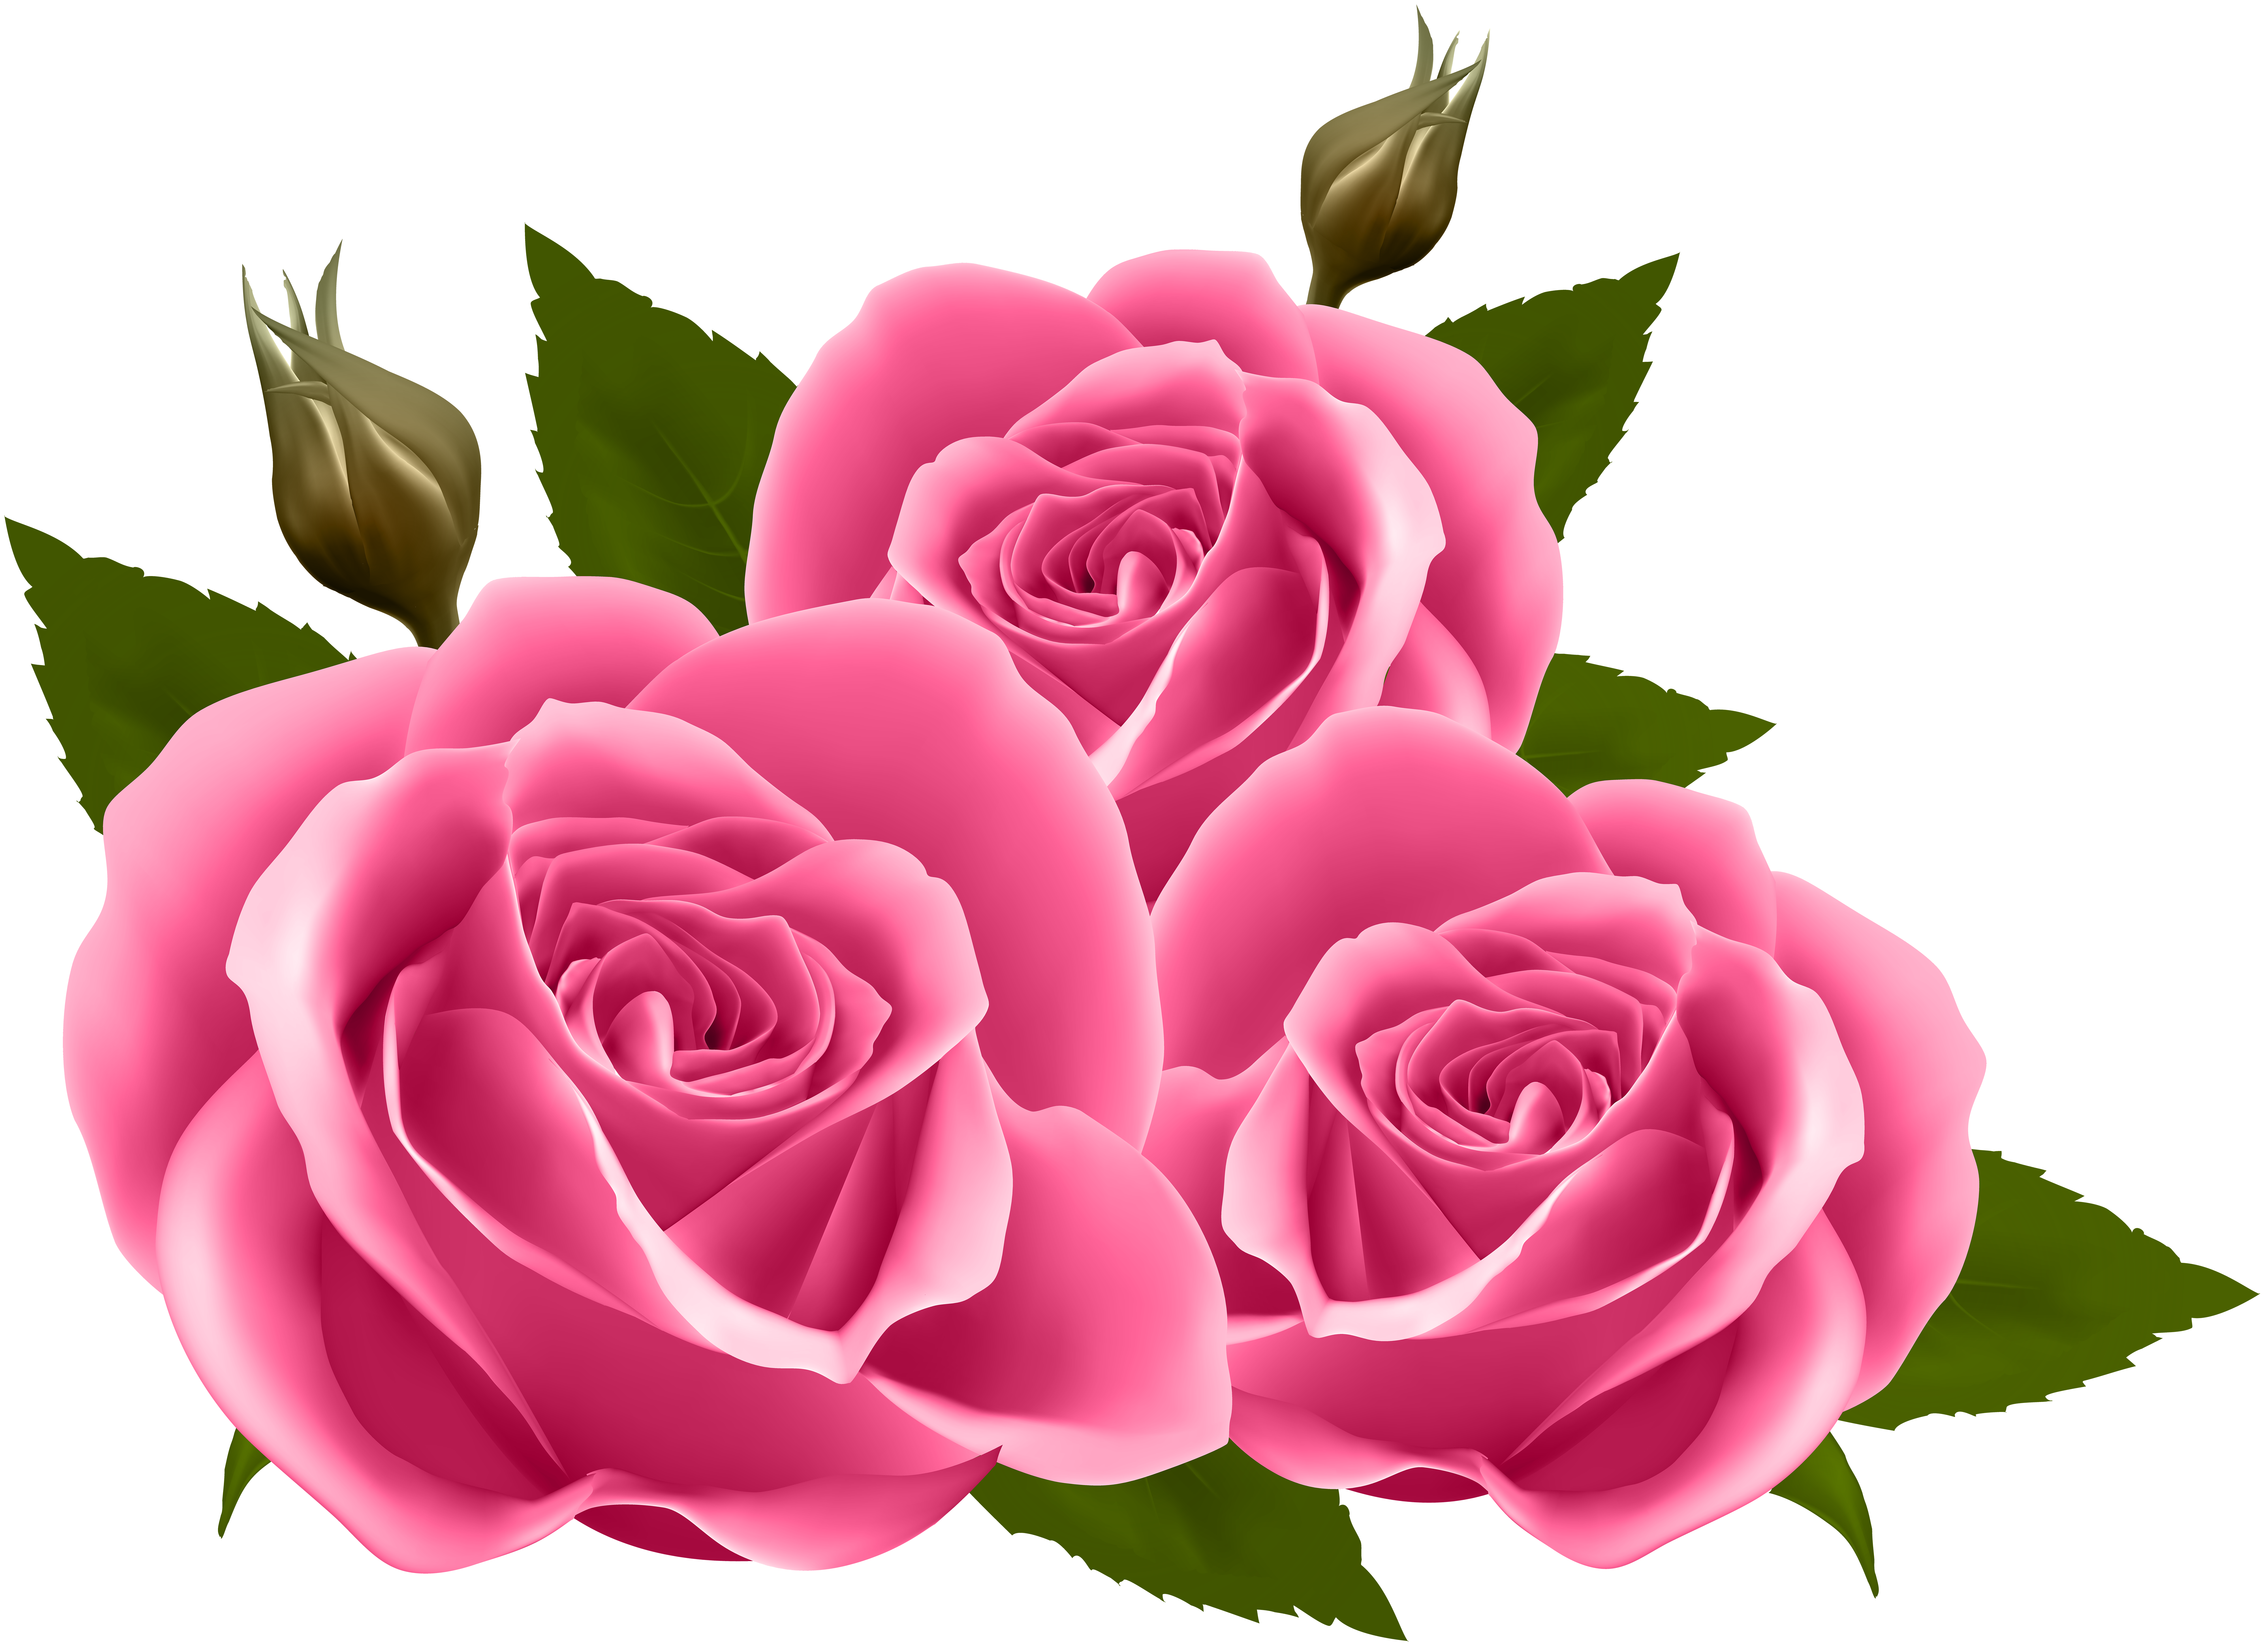 Pink Roses Png Clip Art Image Gallery Yopriceville High Quality Images And Transparent Png Free Clipart